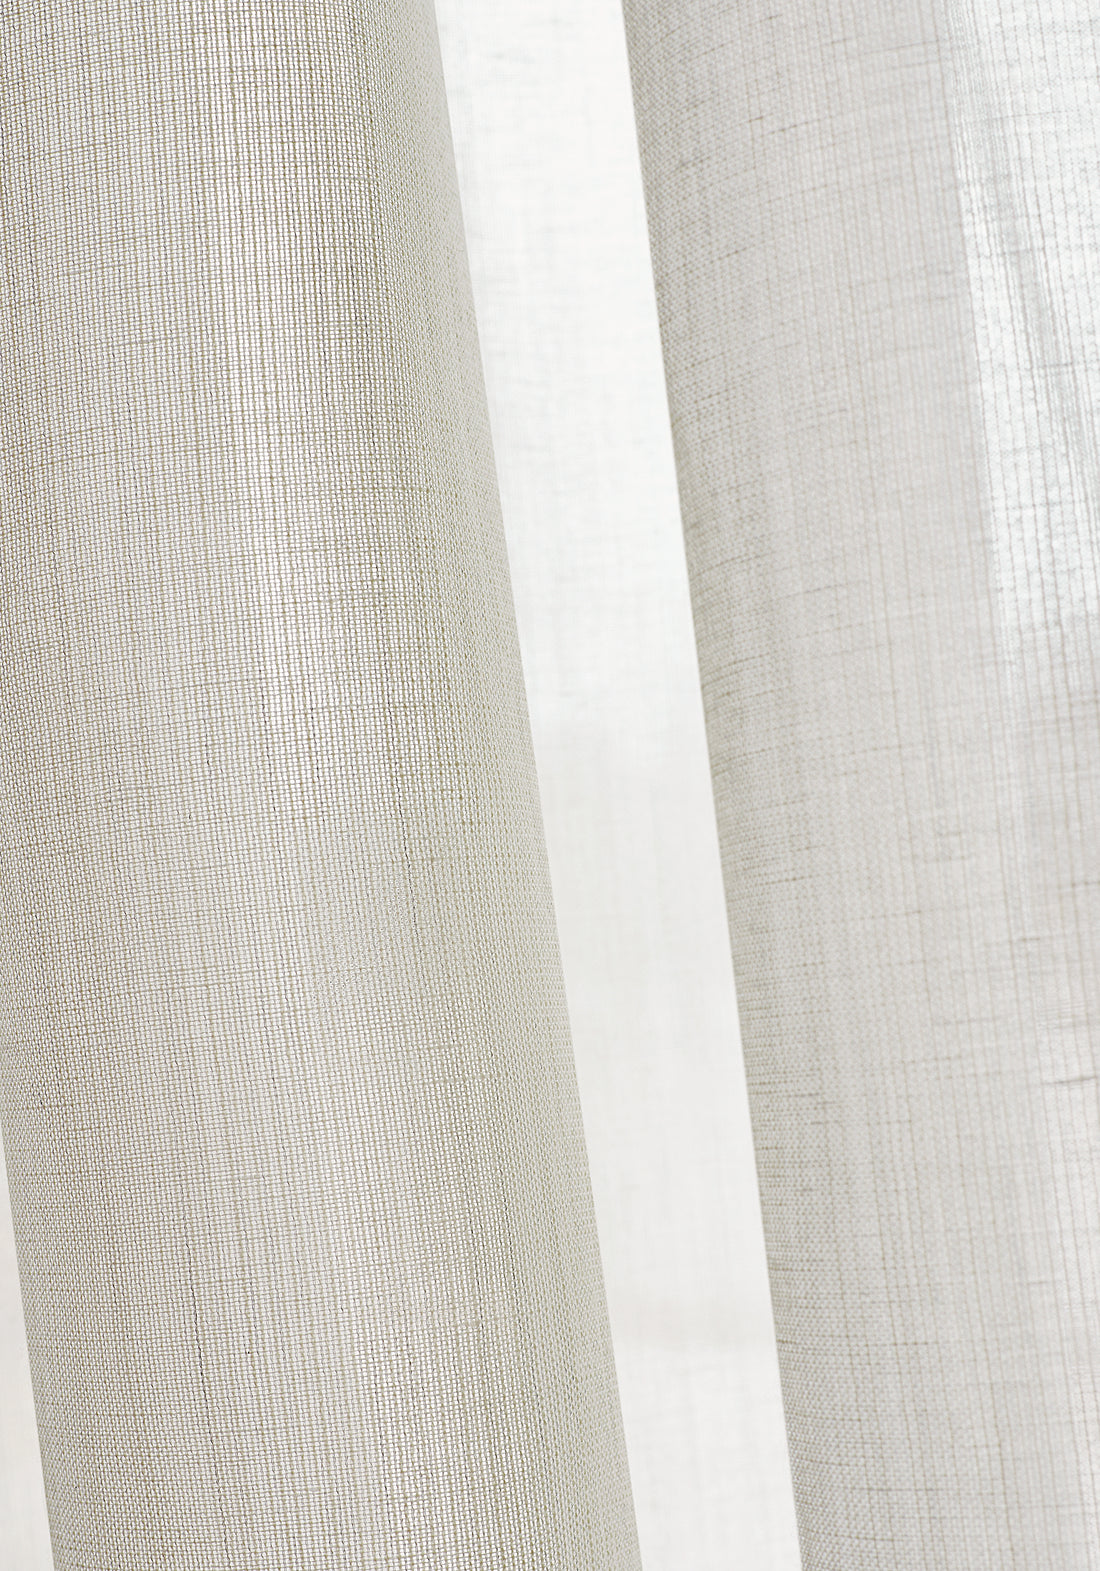 Closeup of sheer drapery curtains made with Thibaut Berkshire woven fabric in Ivory color pattern FWW7118